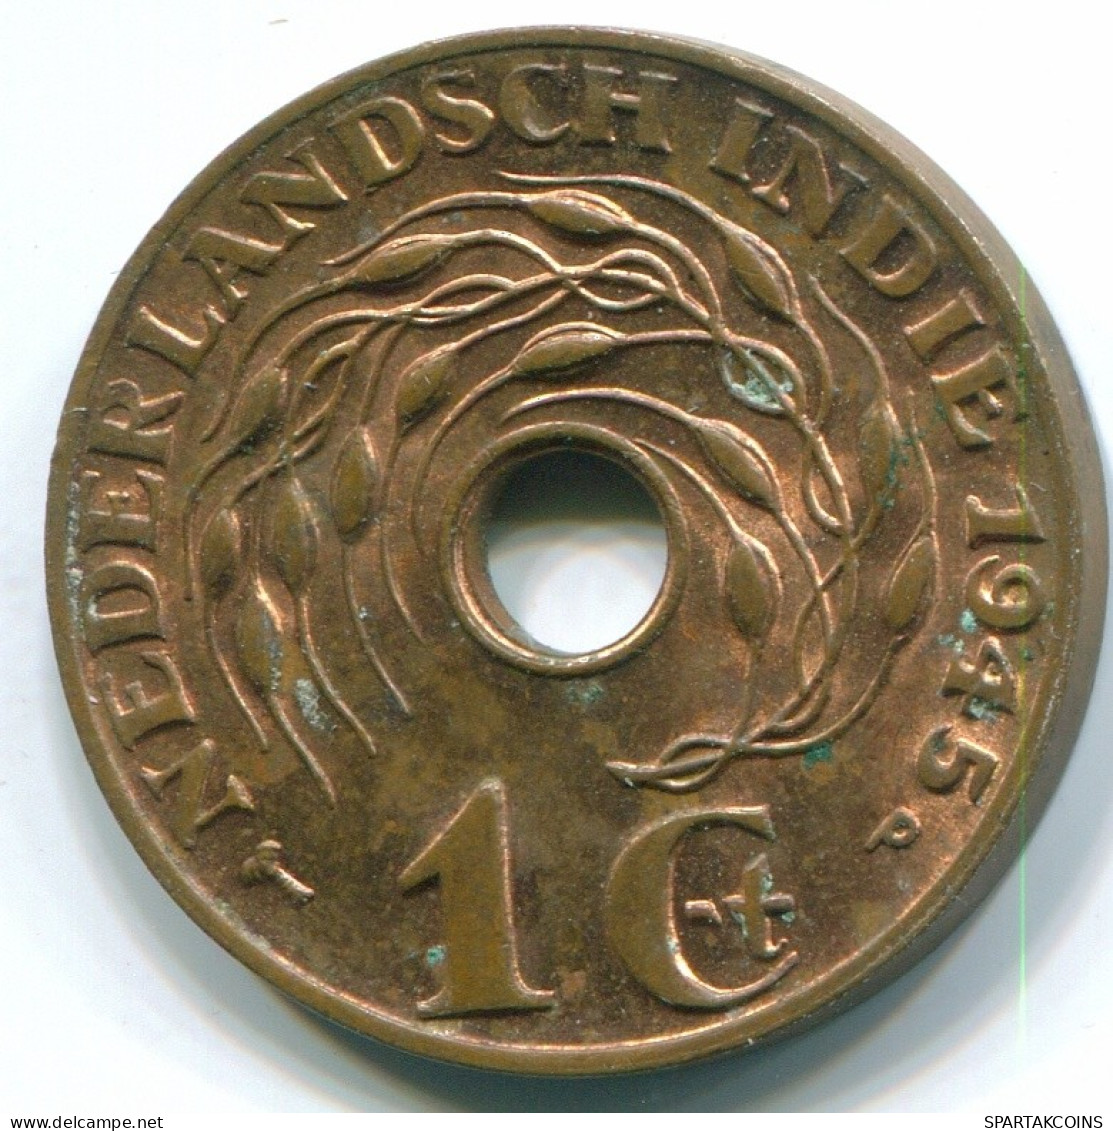 1 CENT 1945 P NETHERLANDS EAST INDIES INDONESIA Bronze Colonial Coin #S10355.U.A - Nederlands-Indië